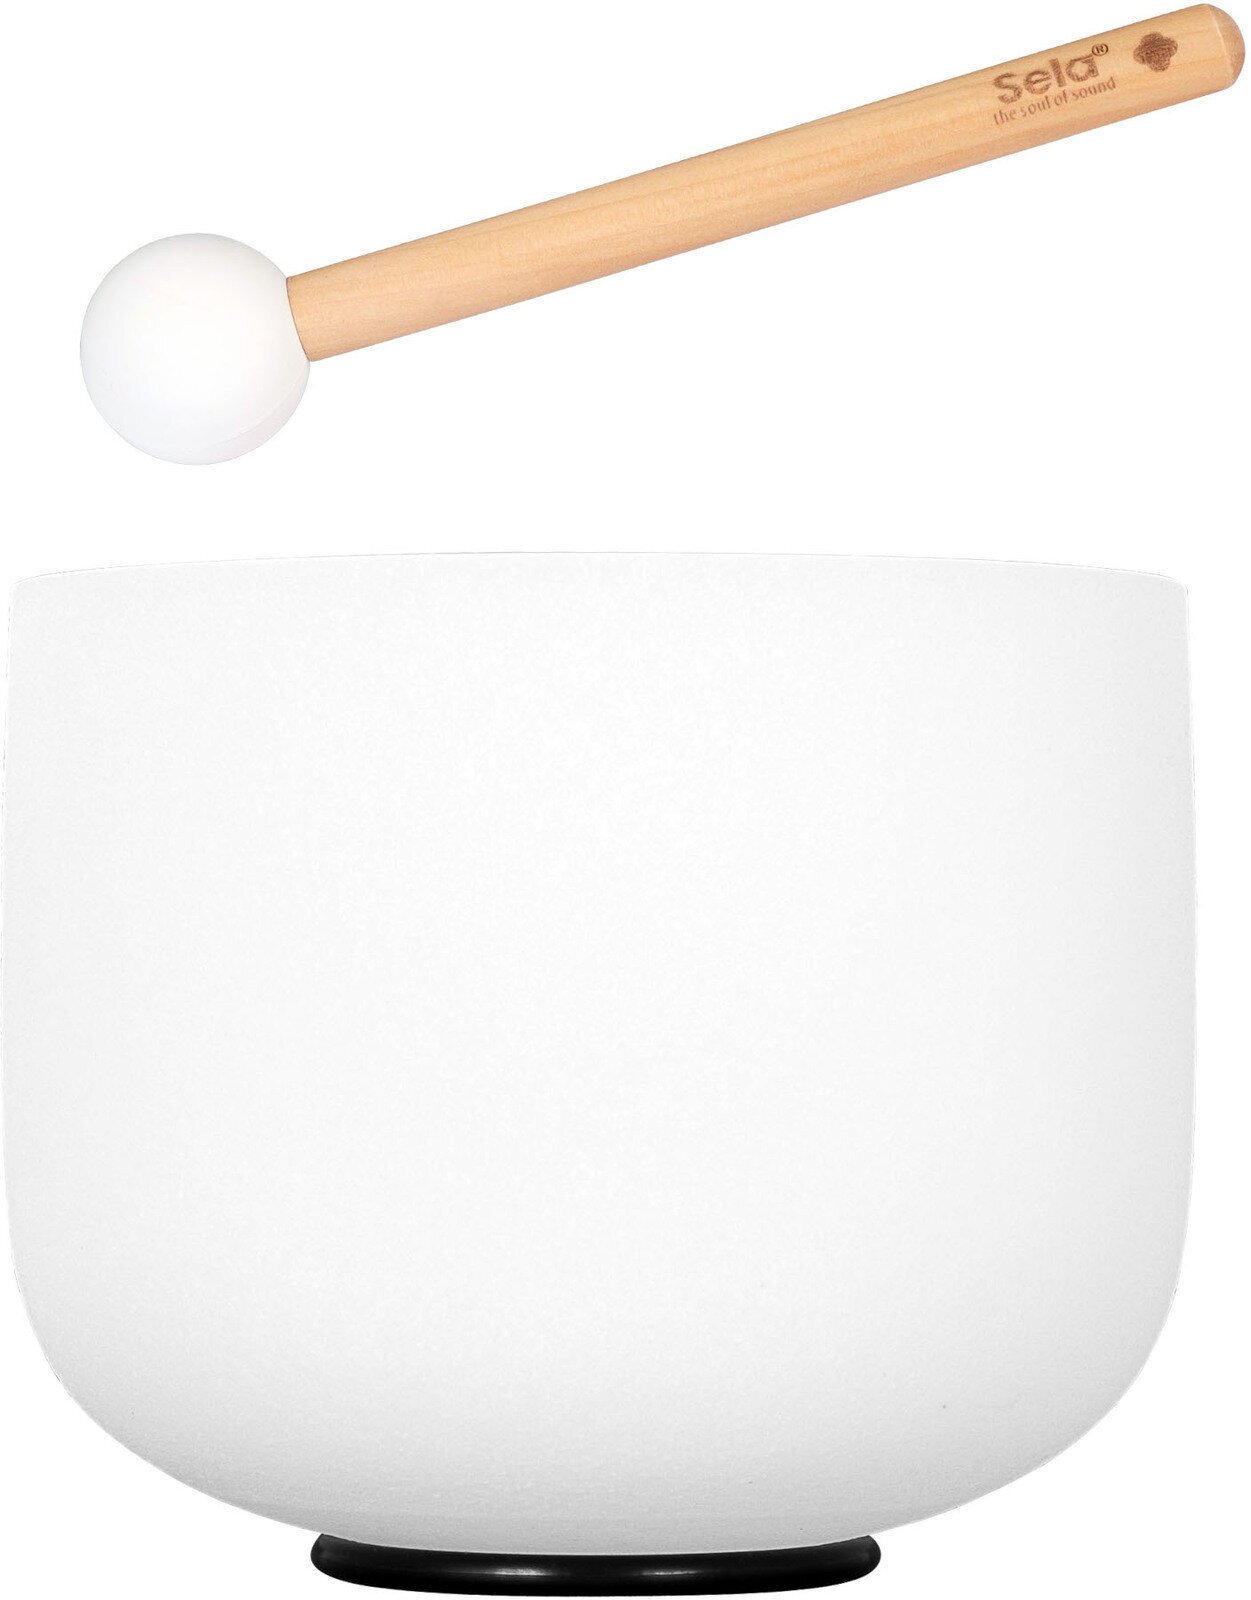 Percussion for music therapy Sela 8" Crystal Singing Bowl Frosted 432 Hz G incl. 1 Wood Mallet